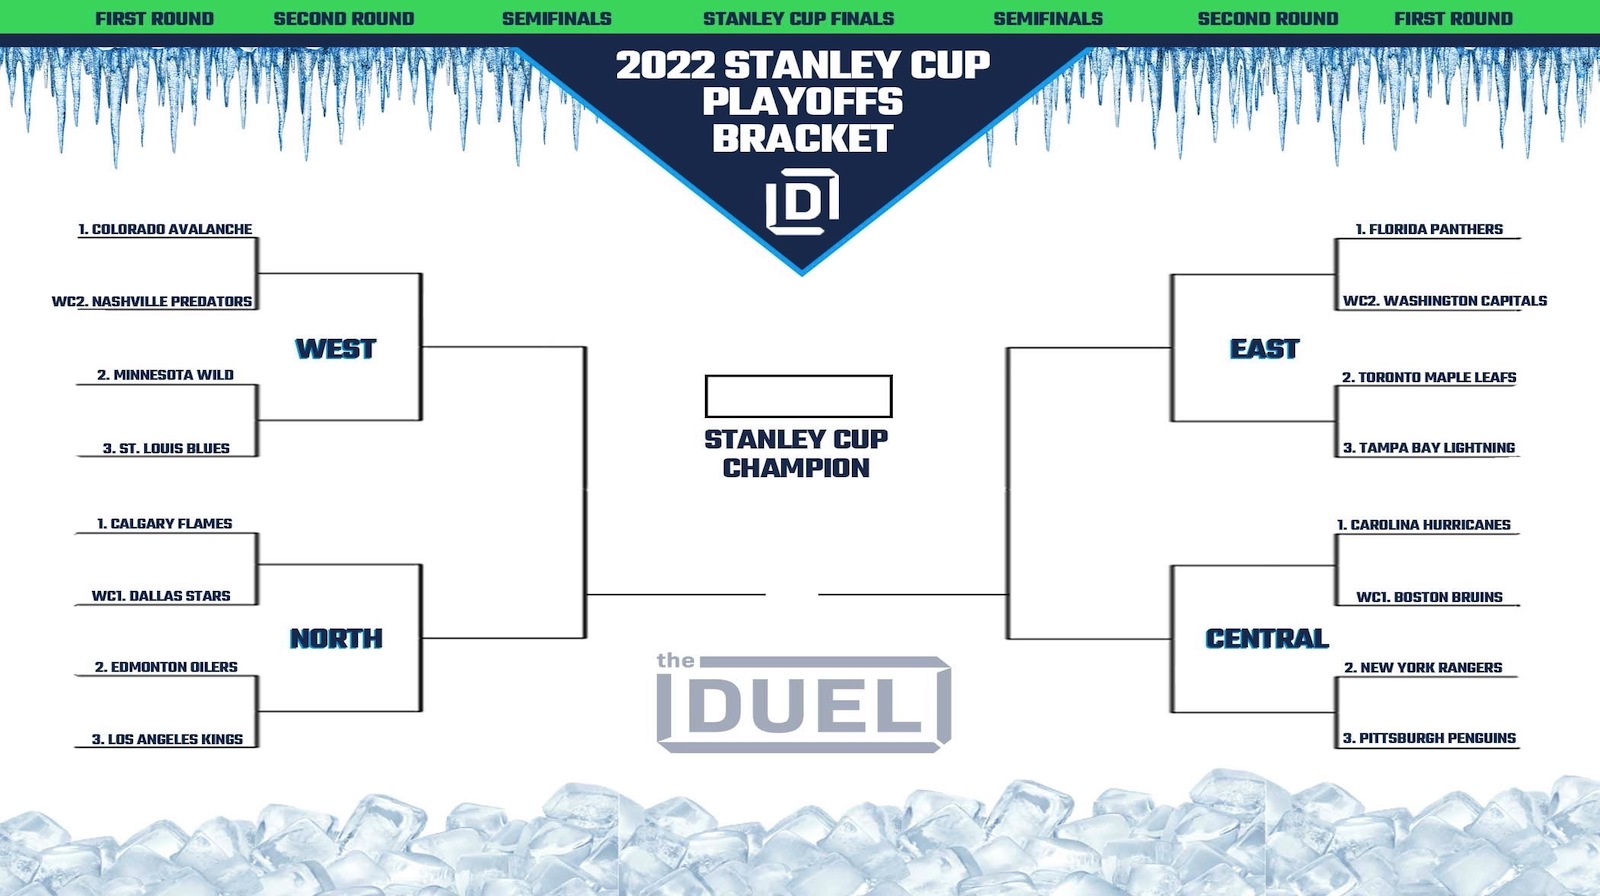 NHL Printable Bracket for 2022 Stanley Cup Playoffs FanDuel Research